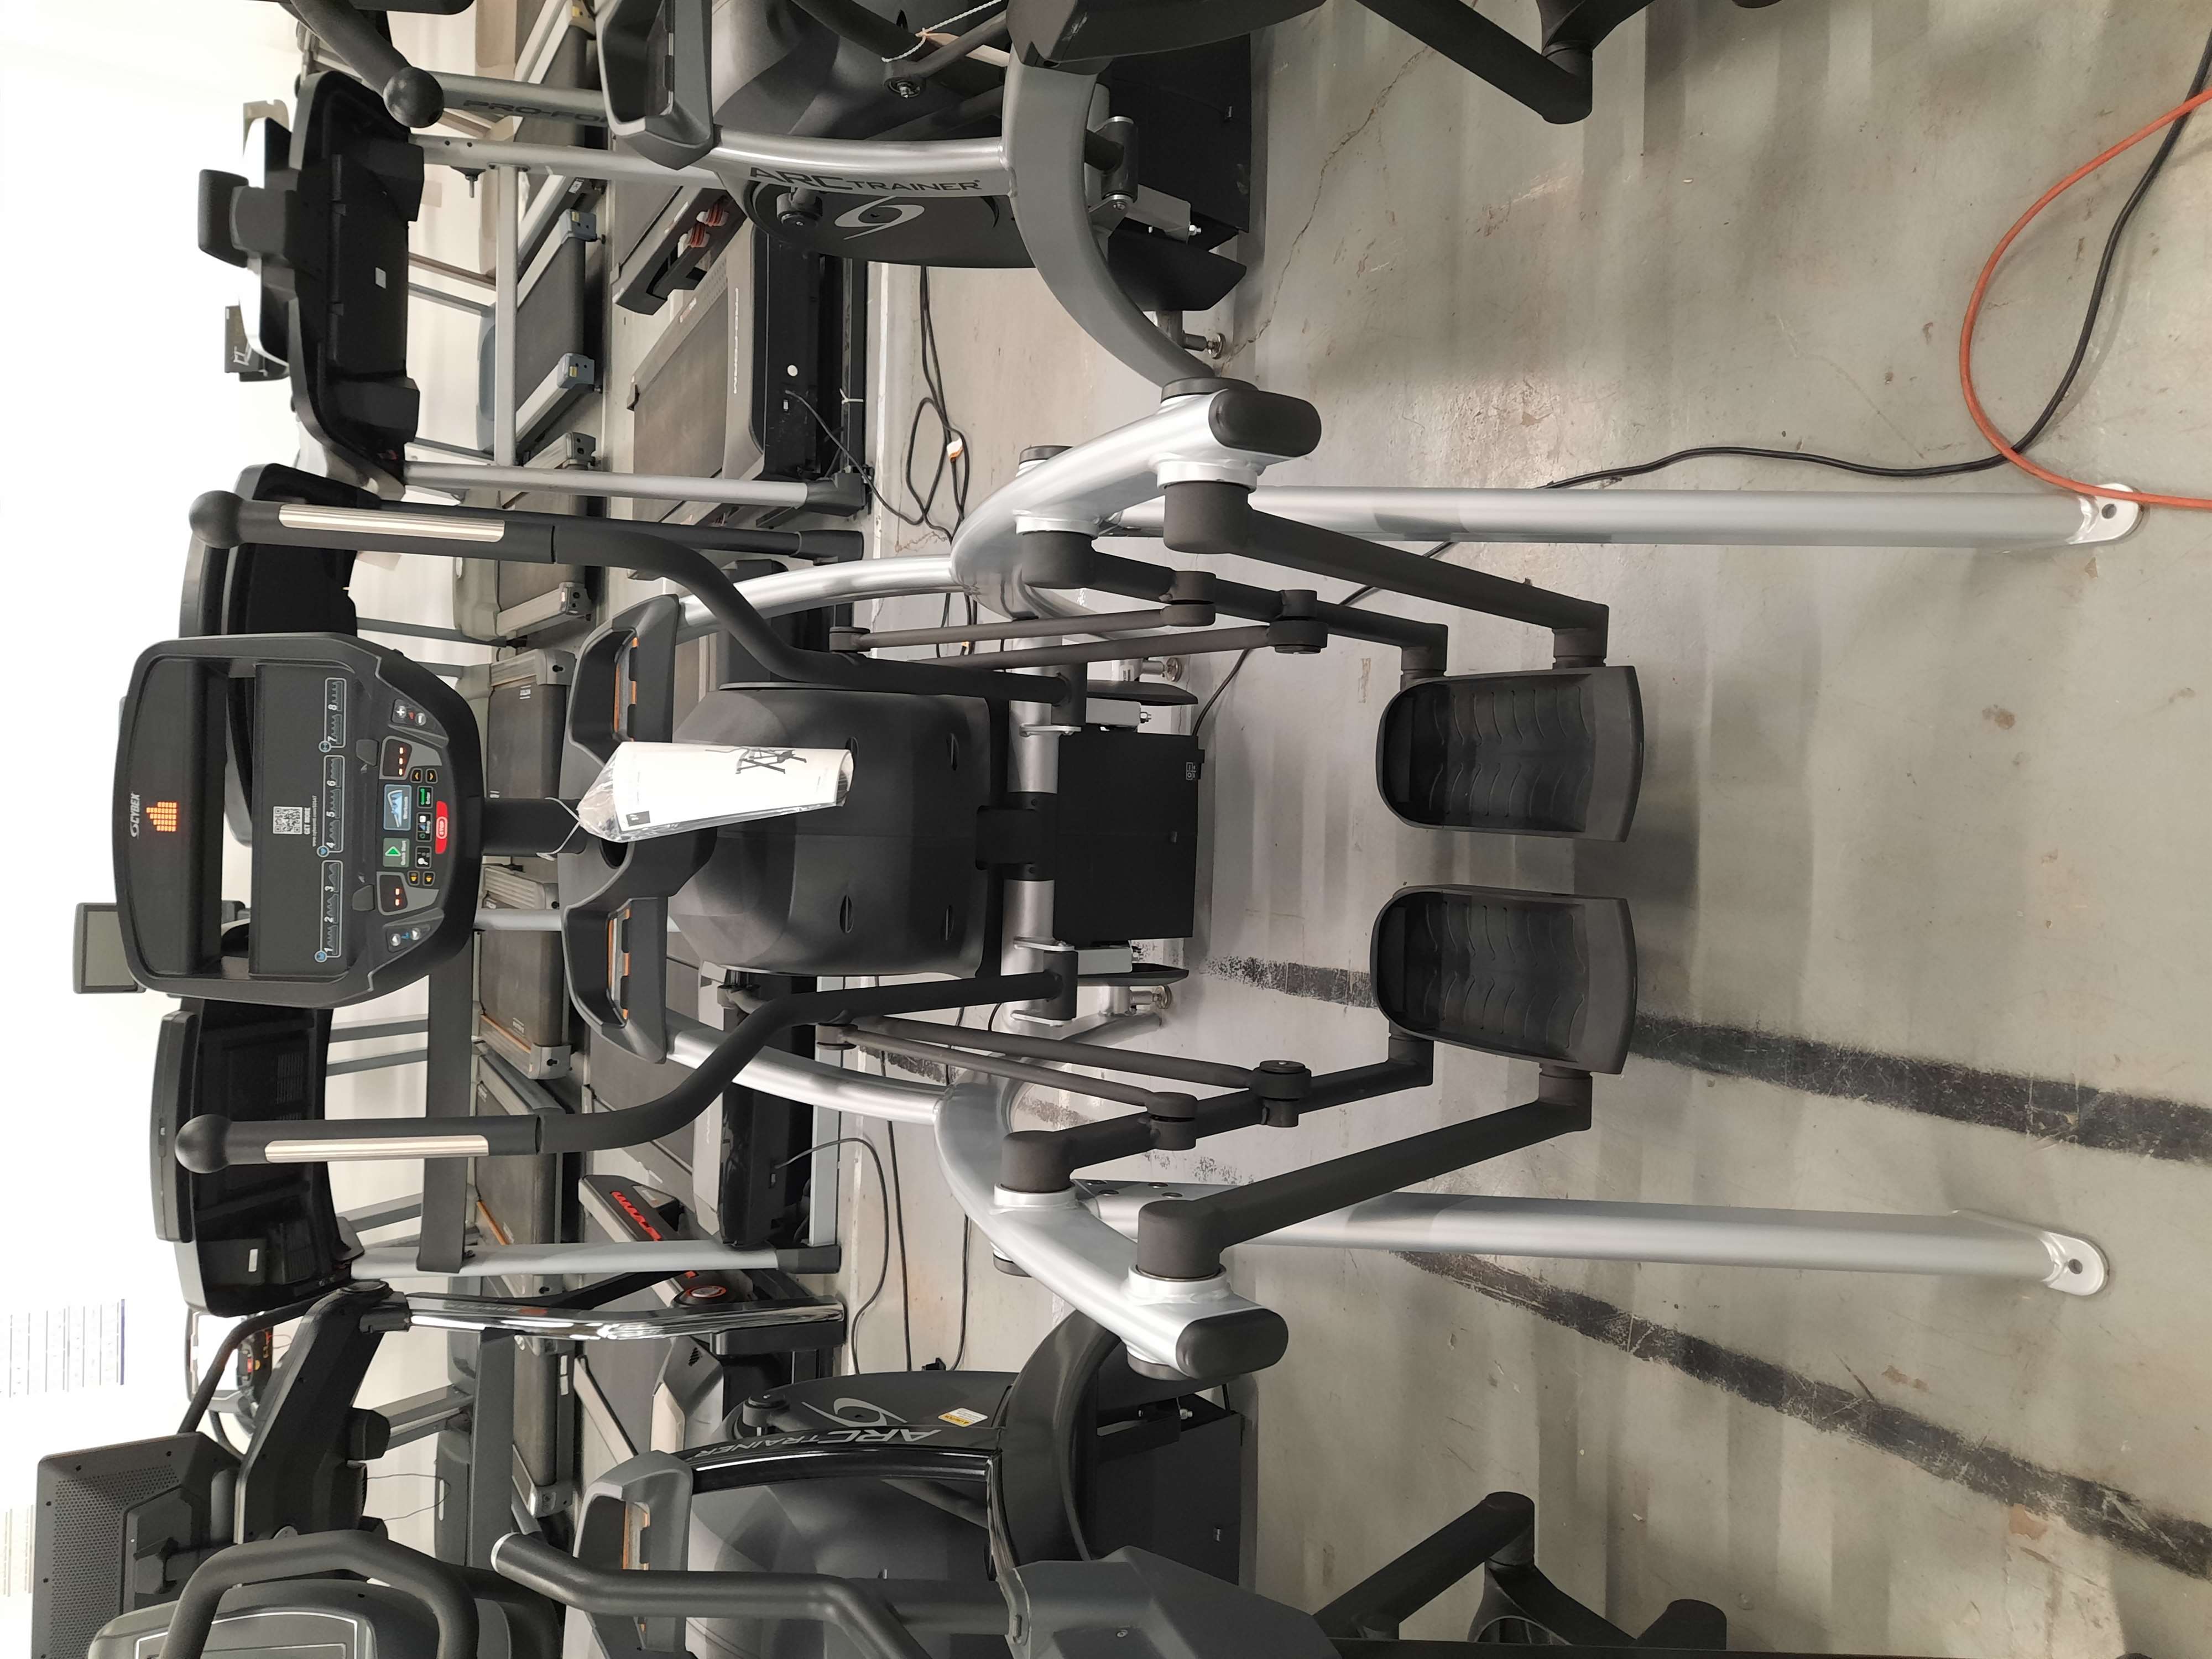 New(other) Cybex 525AT Arc Trainer W Moving Arms (Floor Model) Elliptical